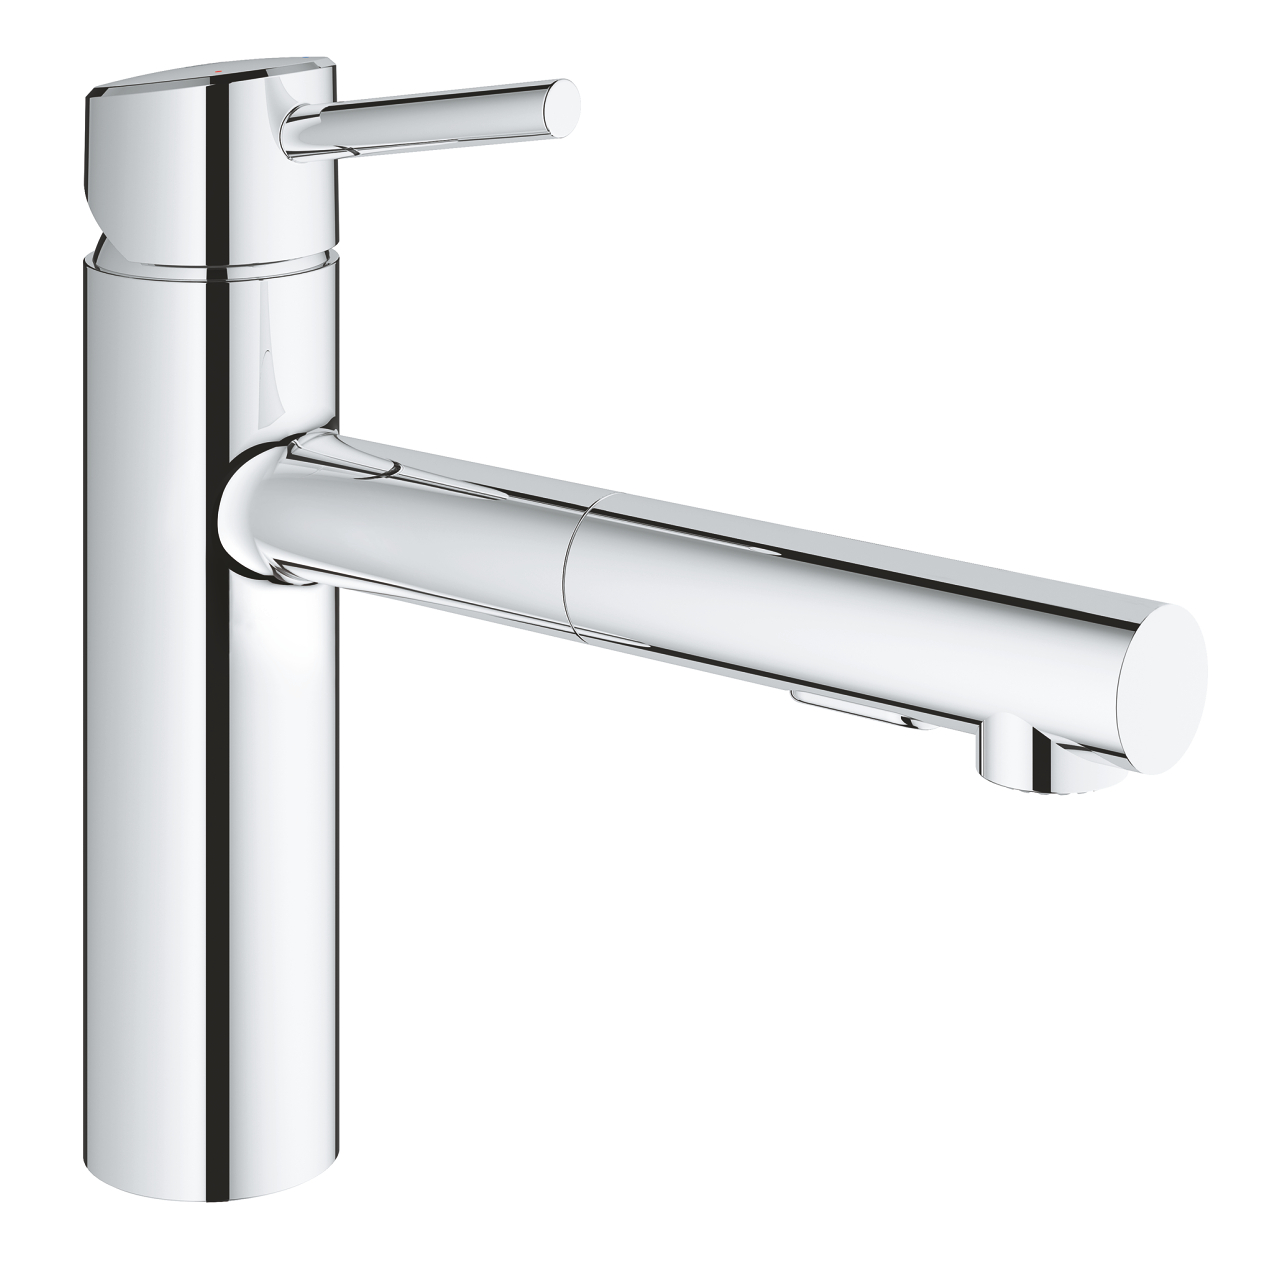 Baterie bucatarie Grohe Concetto cu dus dual spray extractibil crom baterie